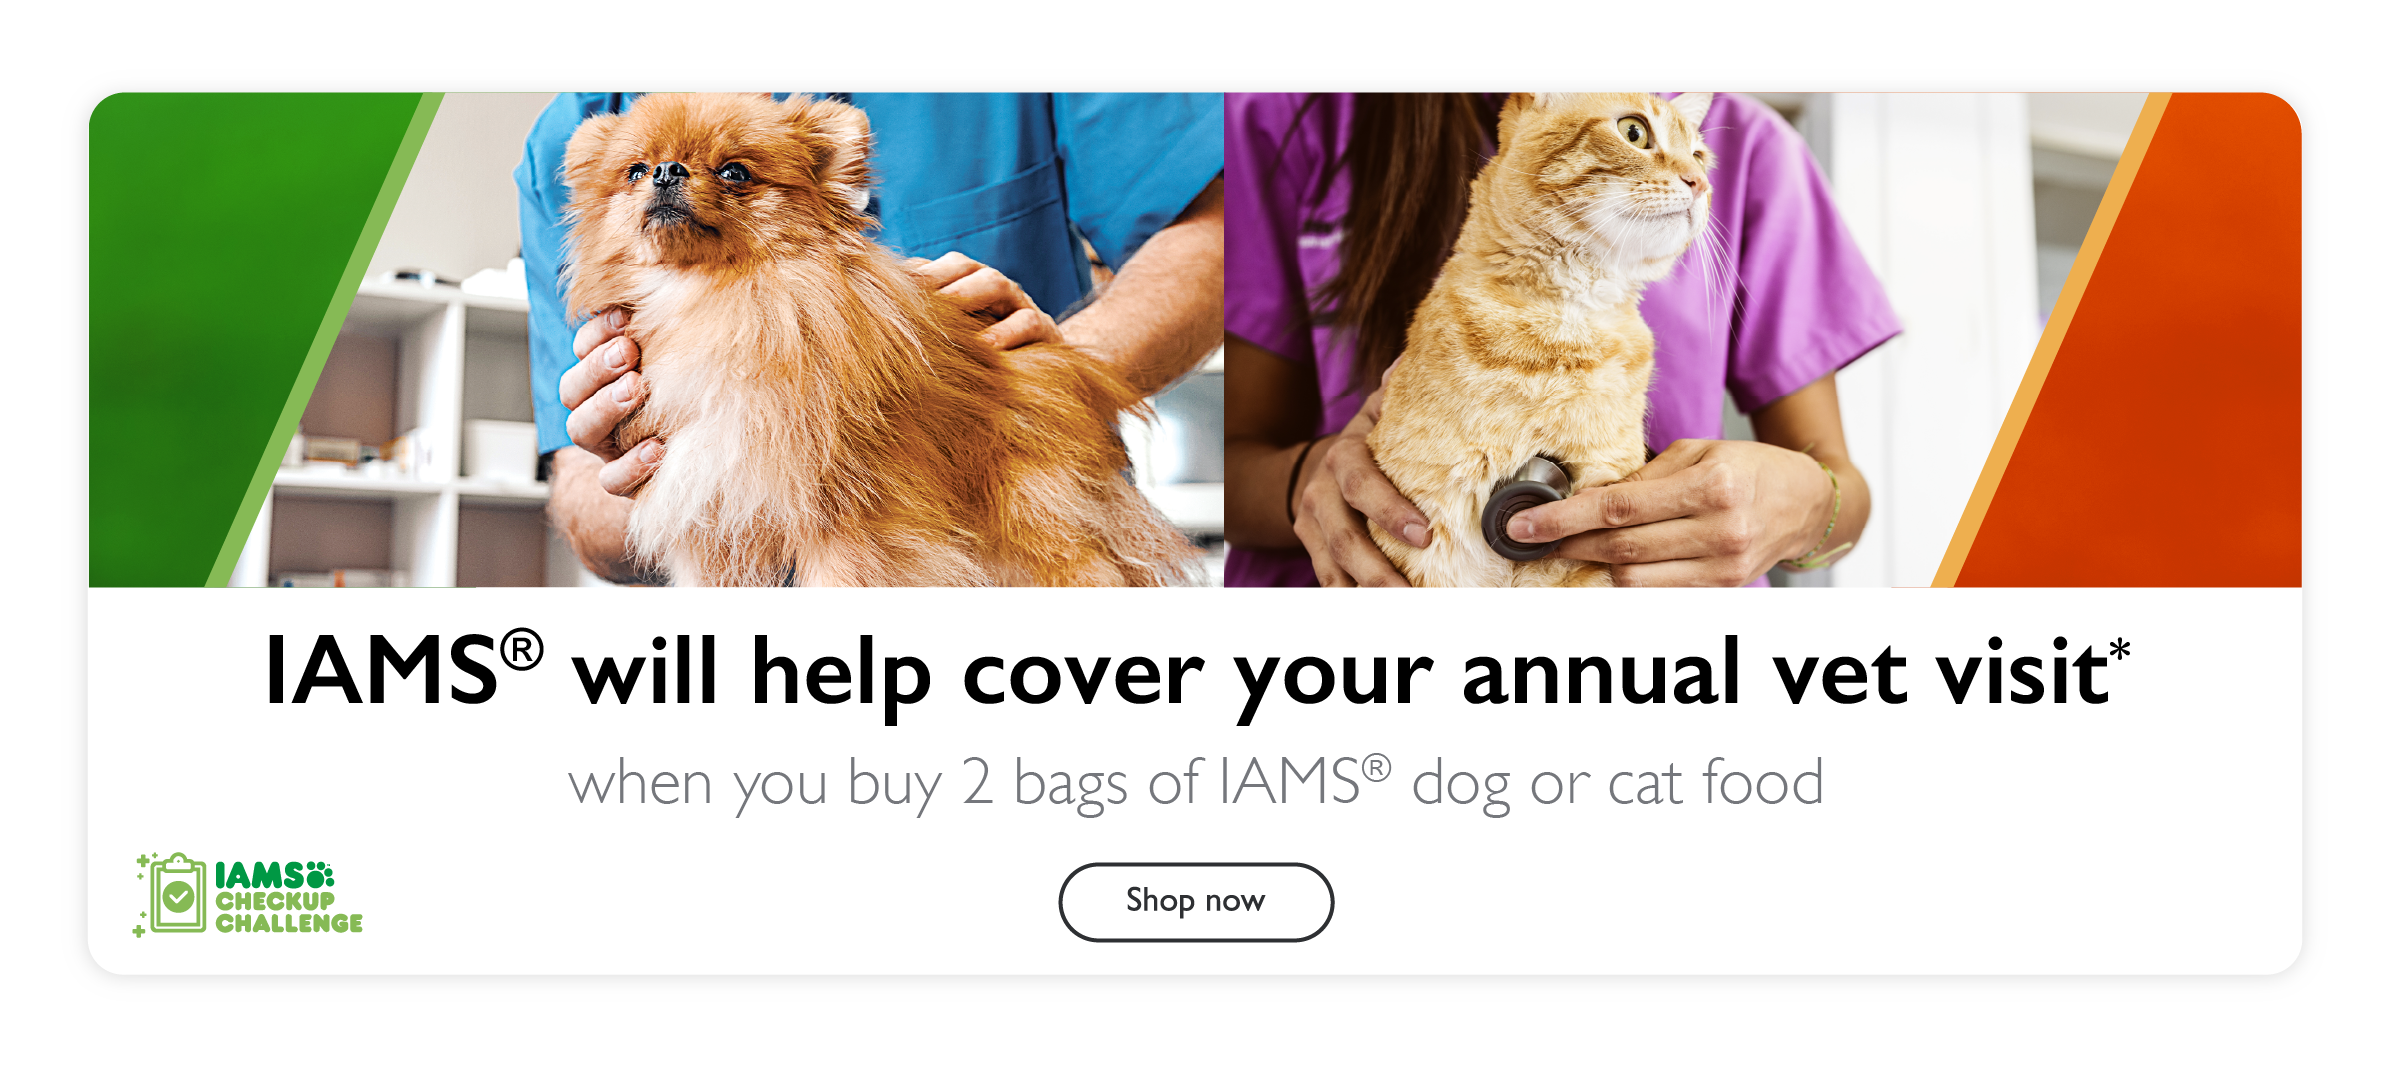 IAMS will help cover your annual vet visit* when you buy 2 bags of IAMS dog or cat food. Shop now.